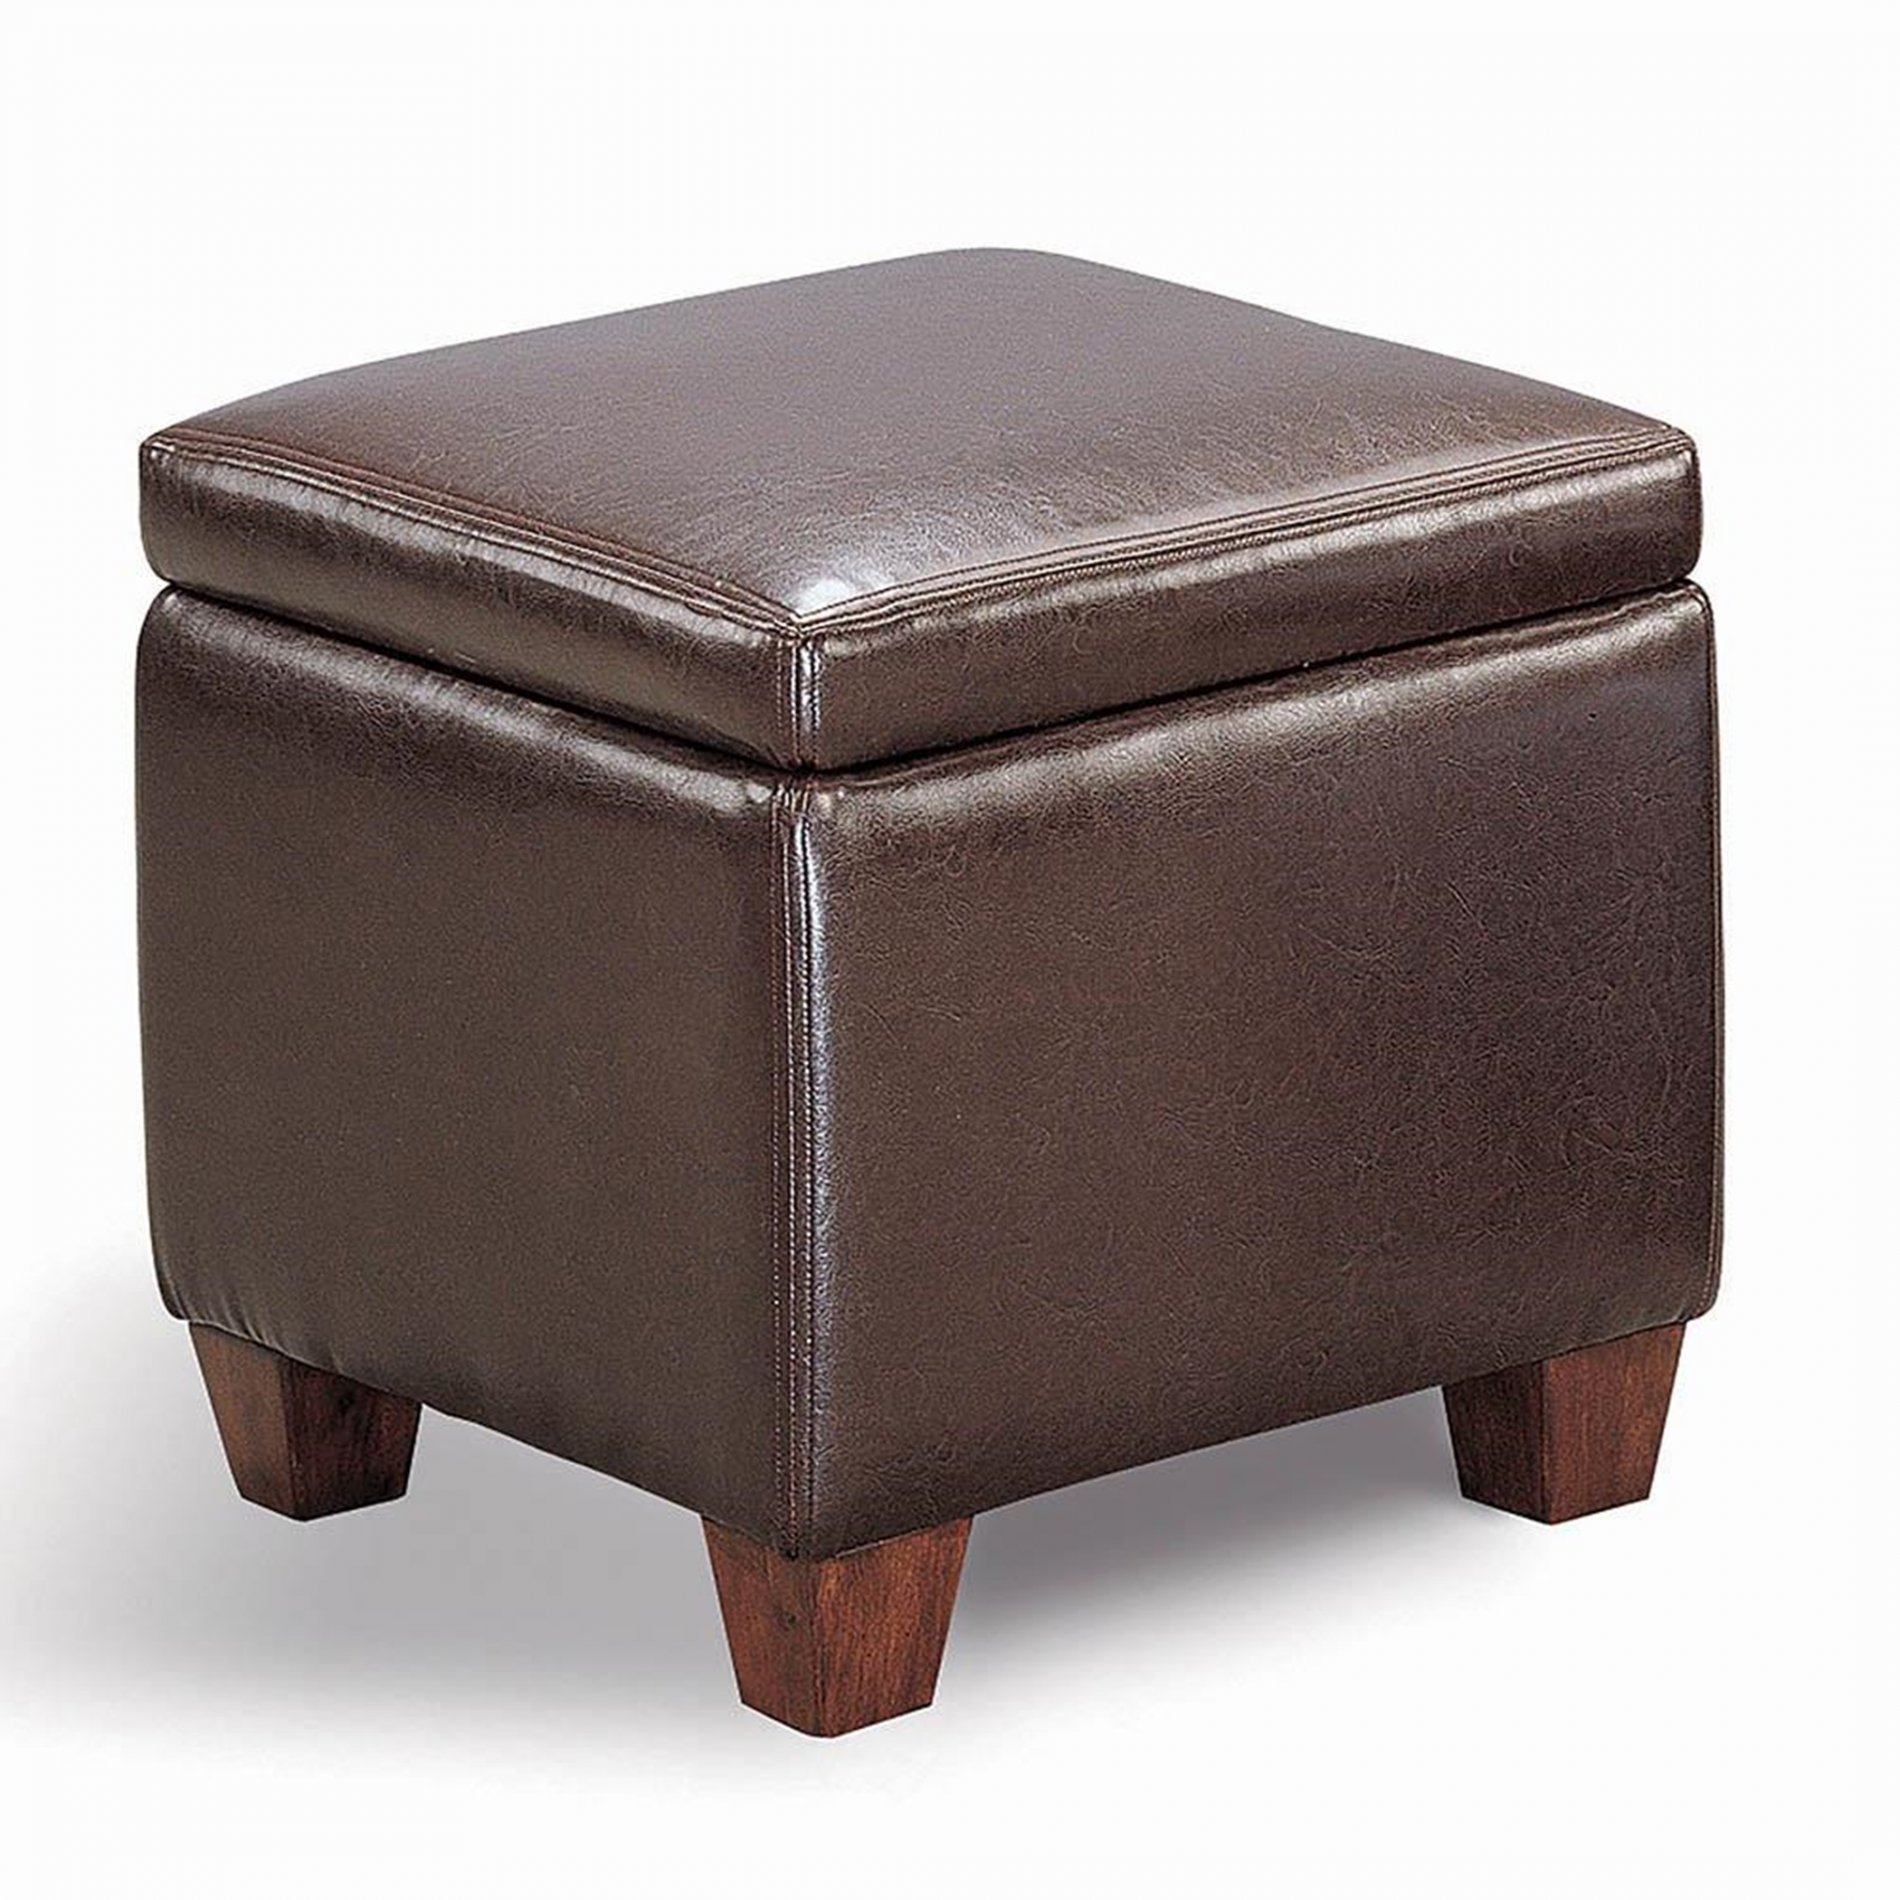 Causal Brown Storage Ottoman - Click Image to Close